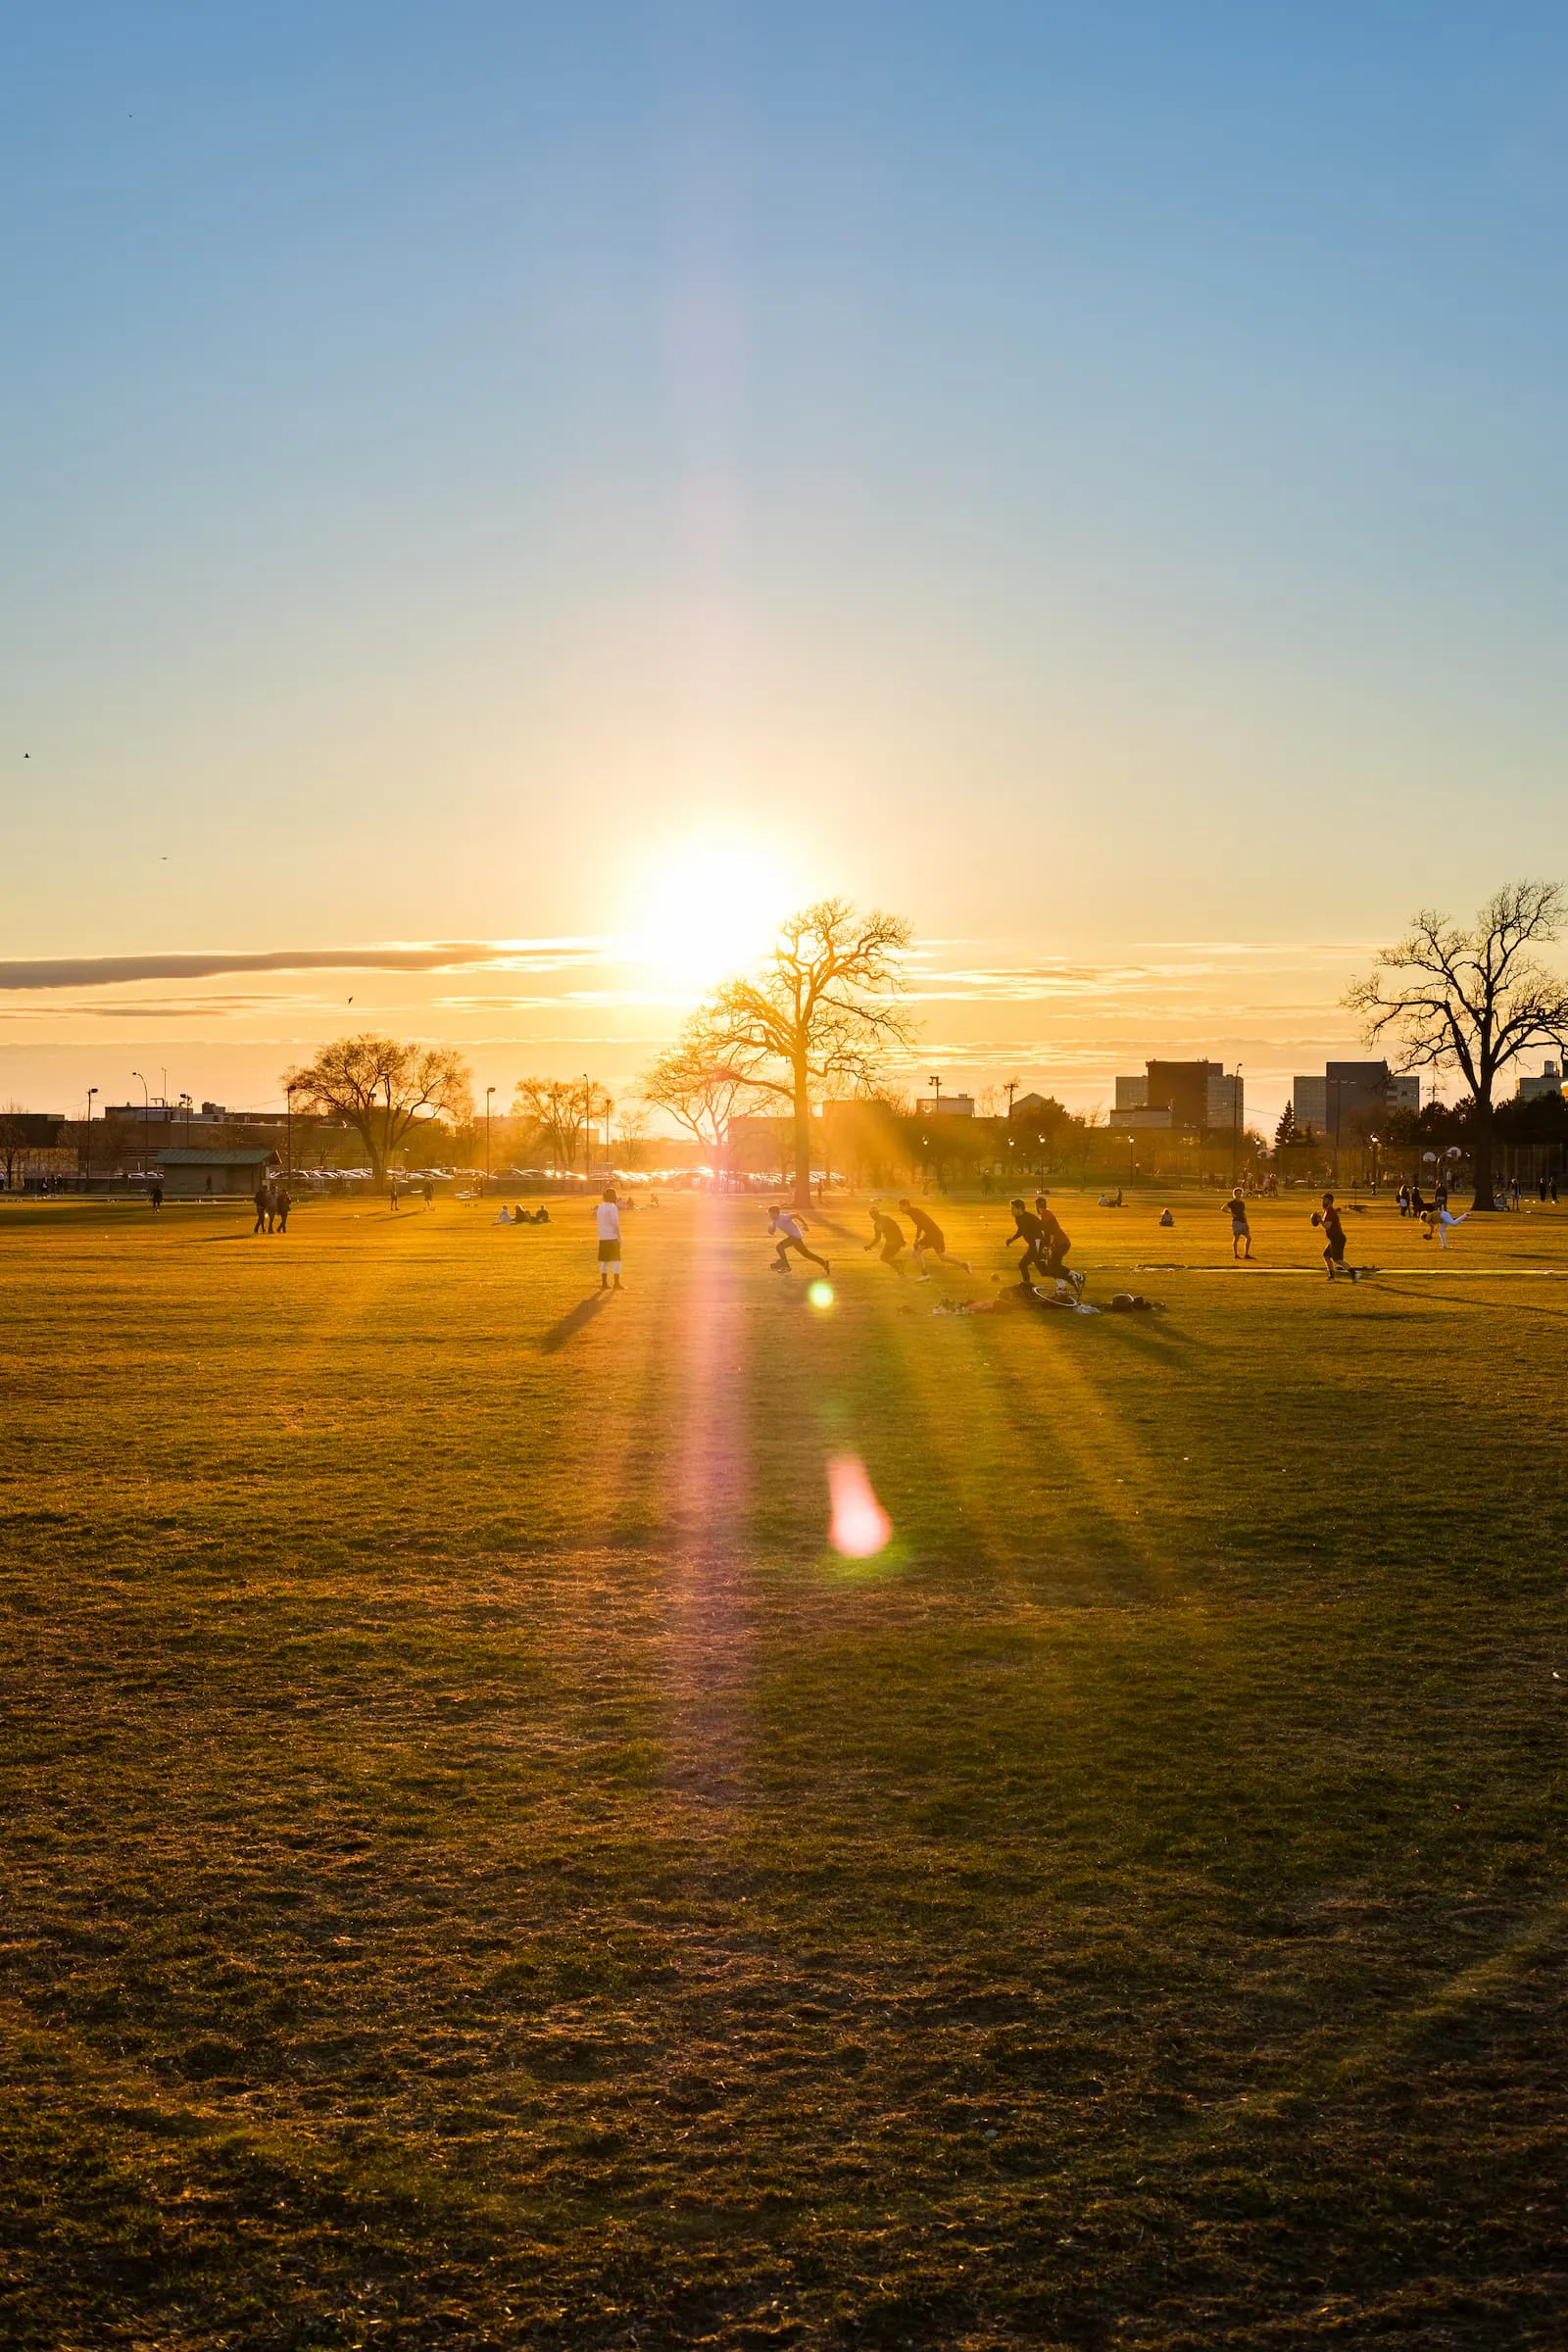 A group of men play rugby in the park as the sun sets behind them